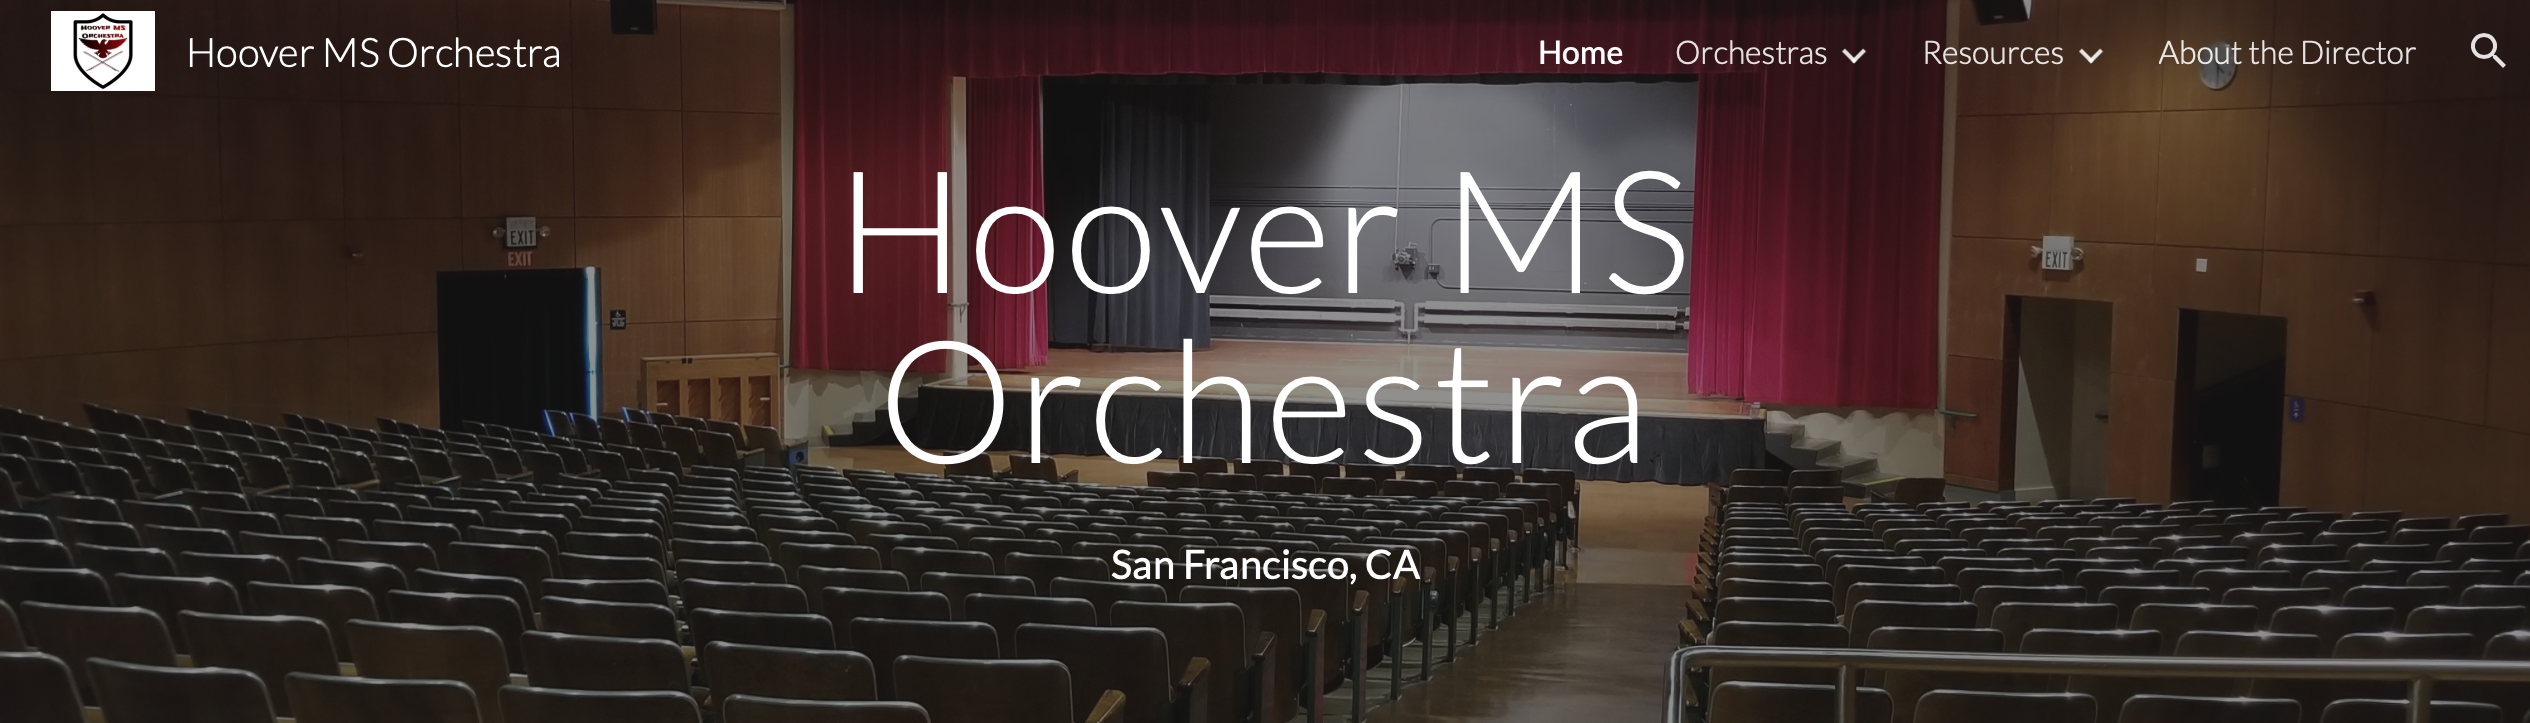 Hoover MS Orchestra's Website